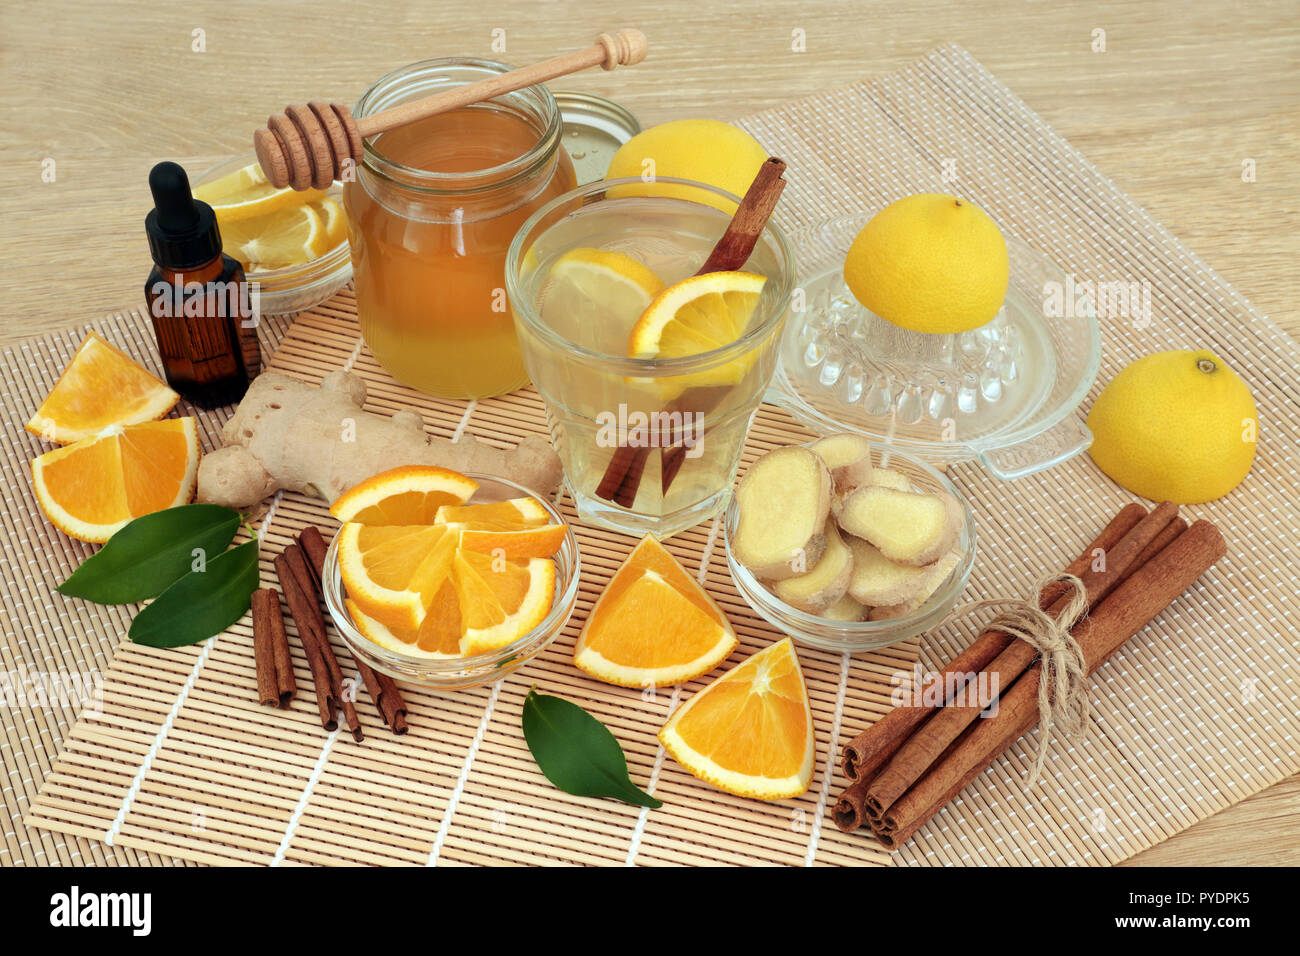 Ingredients for cold and flu remedy with ginger and cinnamon spice, eucalyptus aromatherapy oil, orange &lemon fruit with honey drink on bamboo mats. Stock Photo